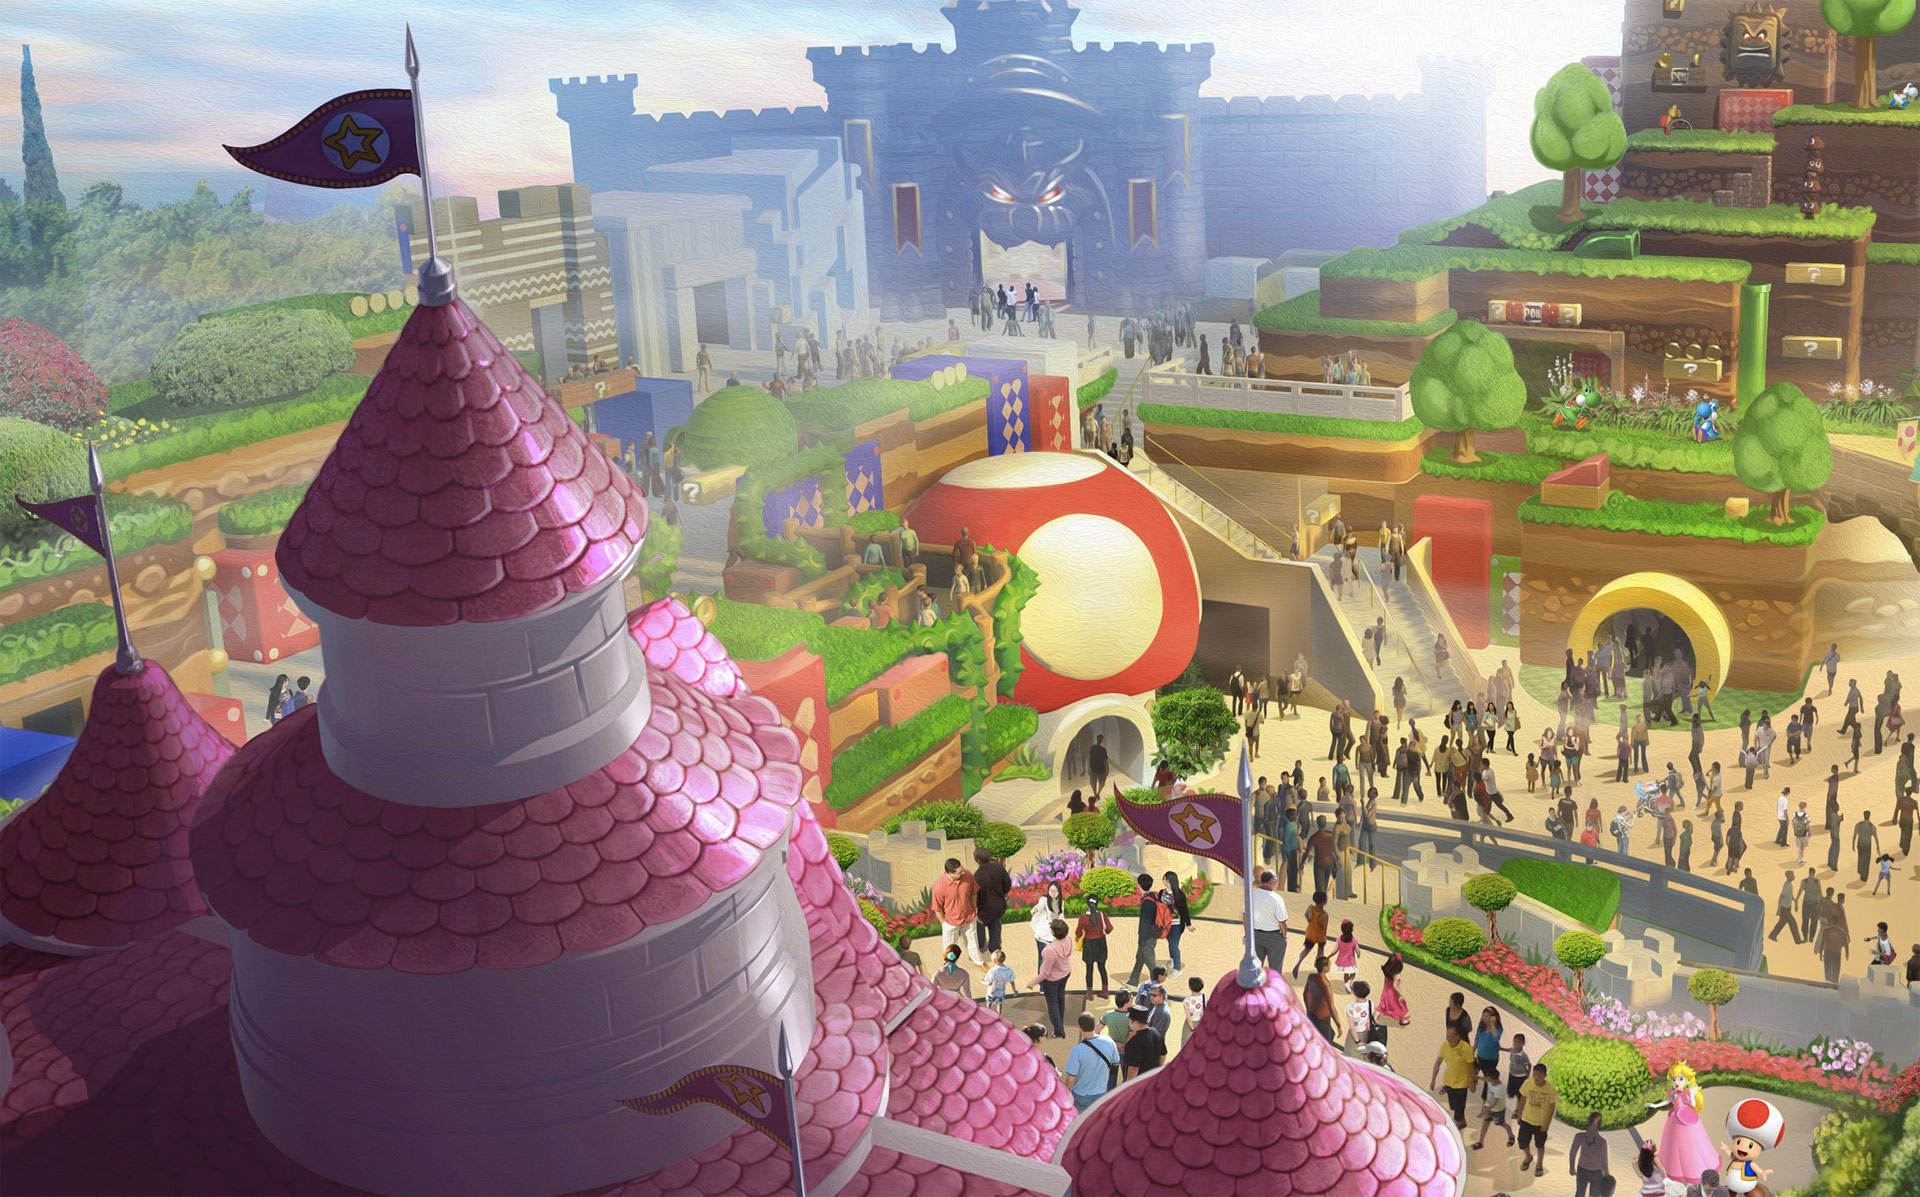 a render of the Super Nintendo World theme park, with Peach’s castle overlooking the rest of a theme park crowded with people